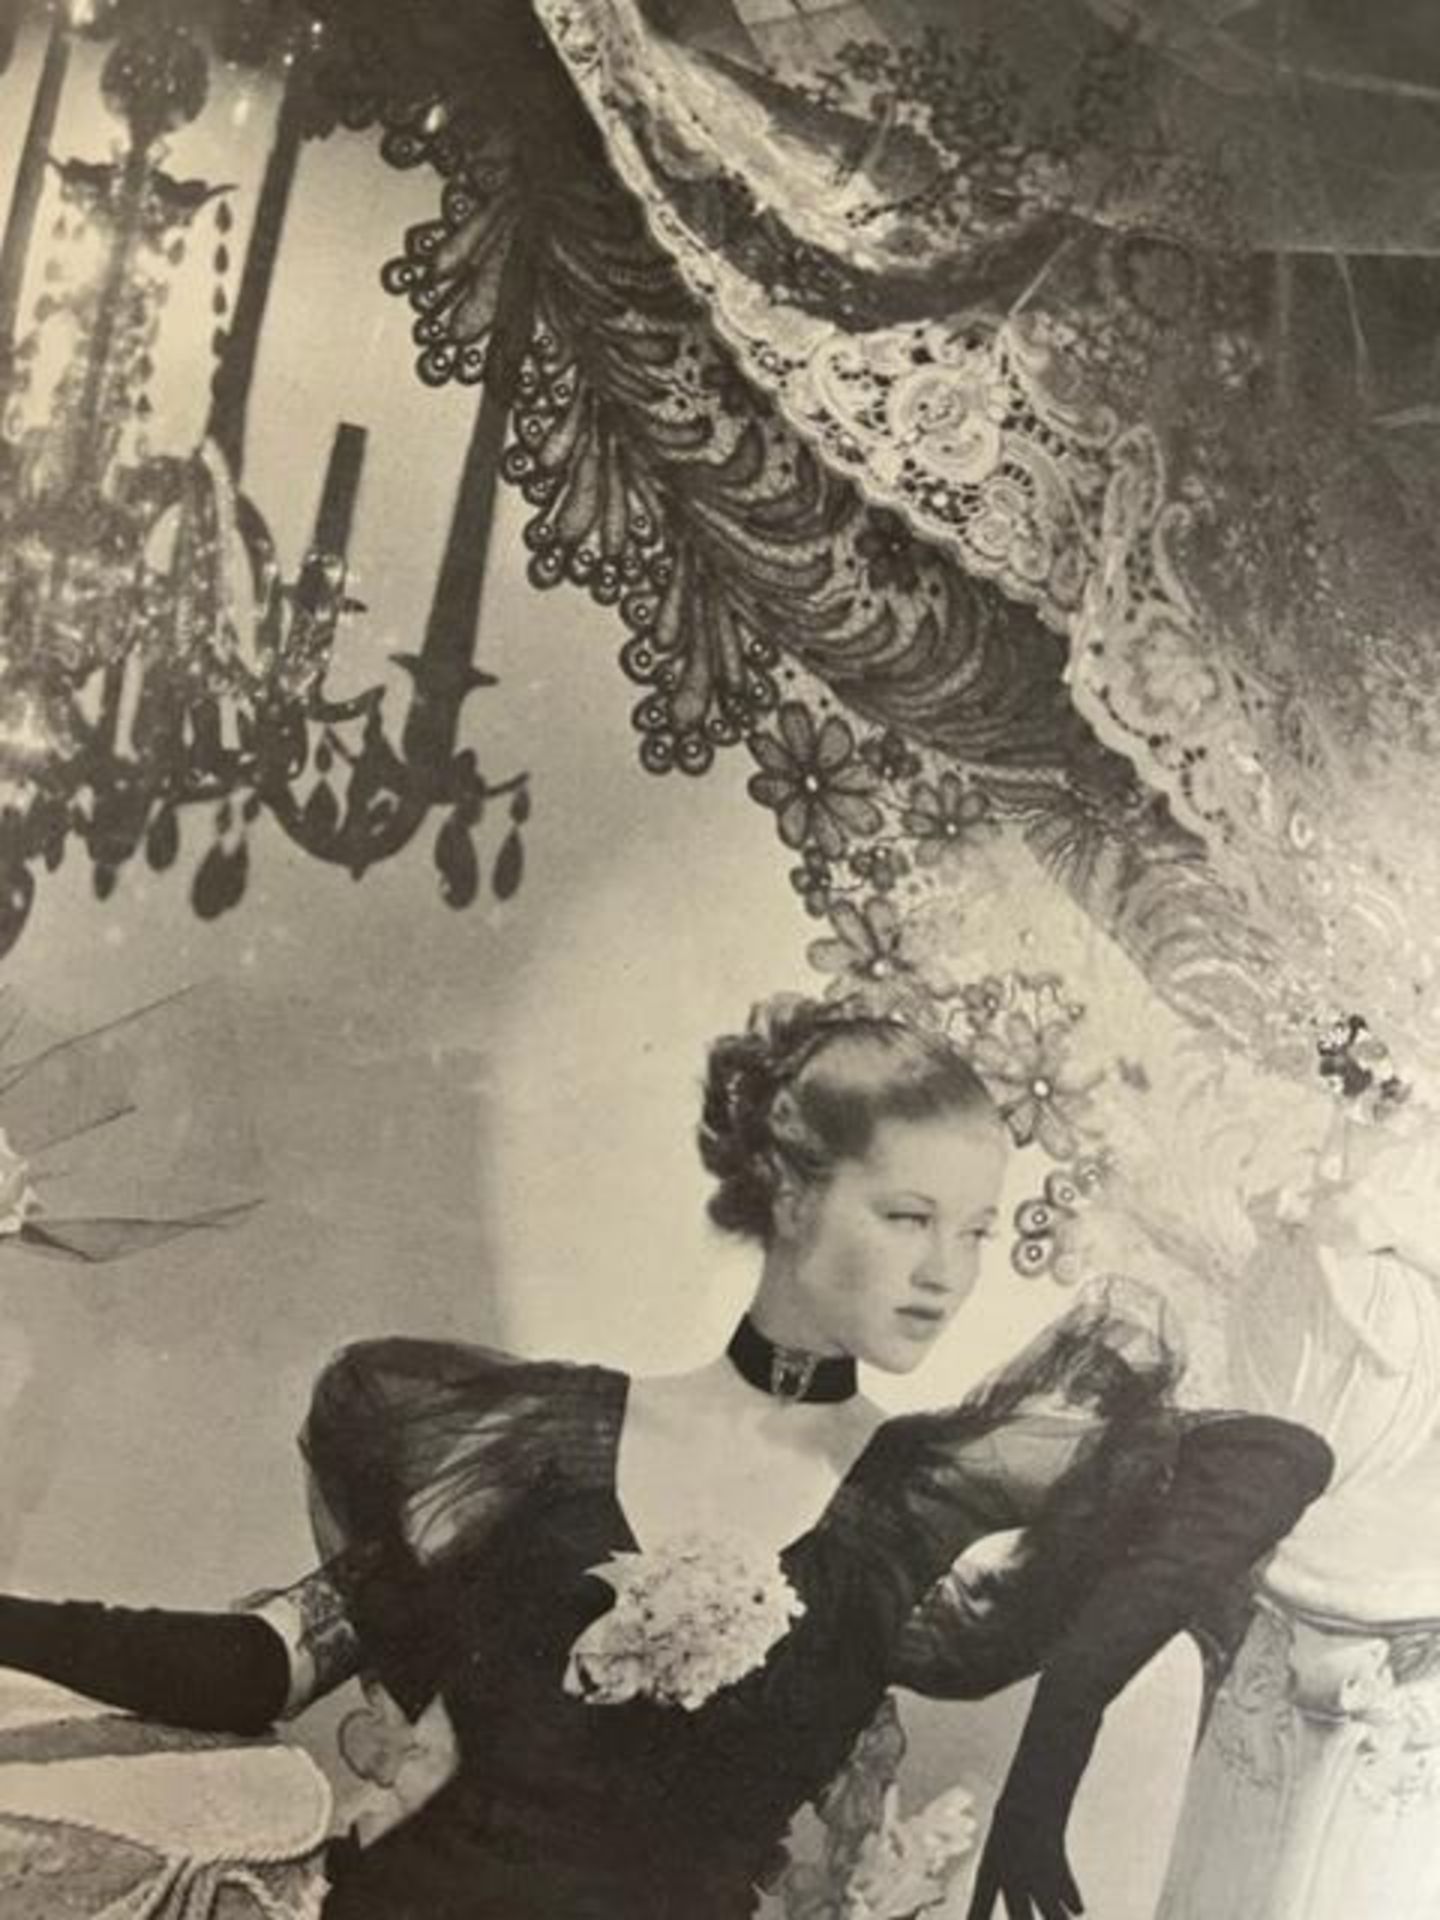 Cecil Beaton "Mary Taylor" Print. - Image 6 of 6